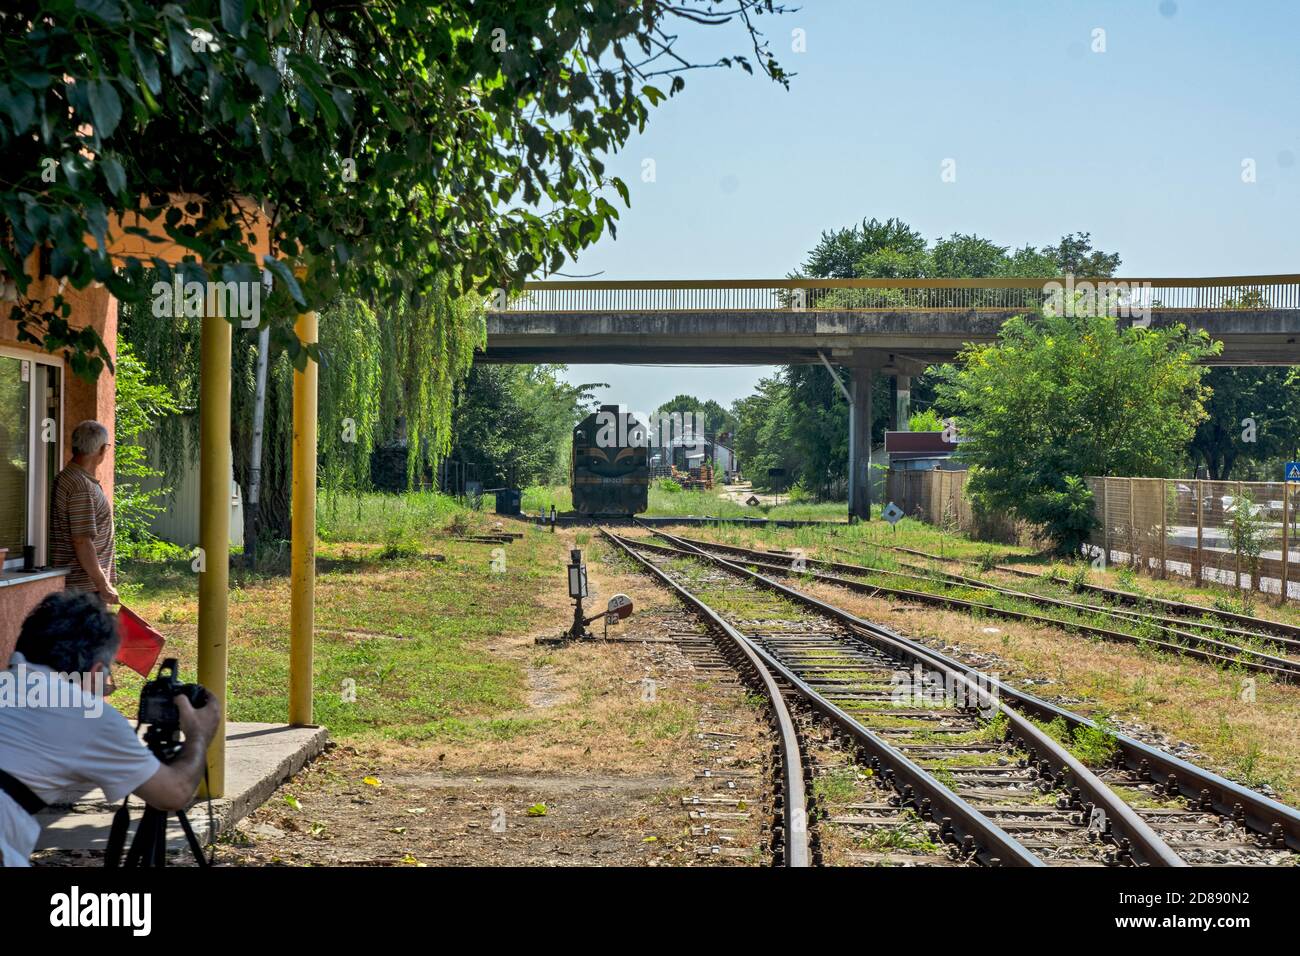 Zrenjanin,Serbia,August 31,2020.Diesel locomotives 661-243 of Serbian railways leave the station and pass under the overpass.Photographer and a railro Stock Photo